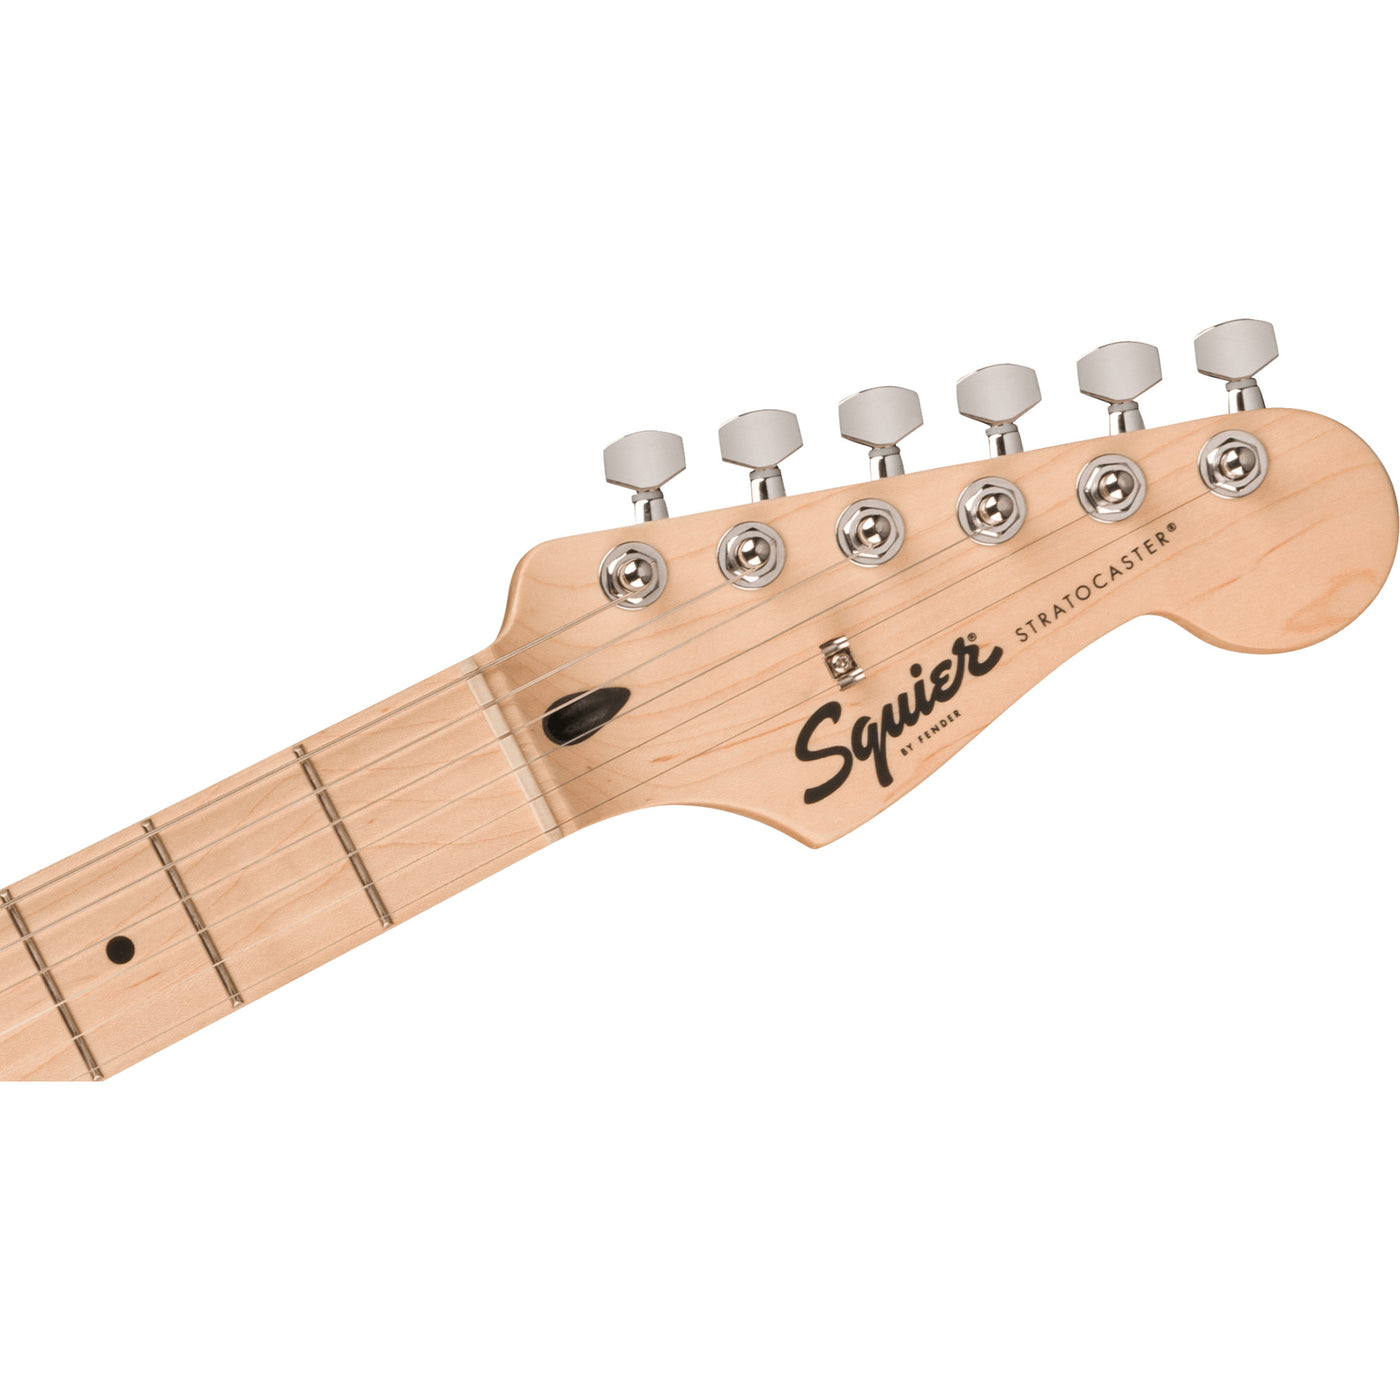 Squier Sonic Stratocaster Electric Guitar Essentials Pack, Black (0371720006)